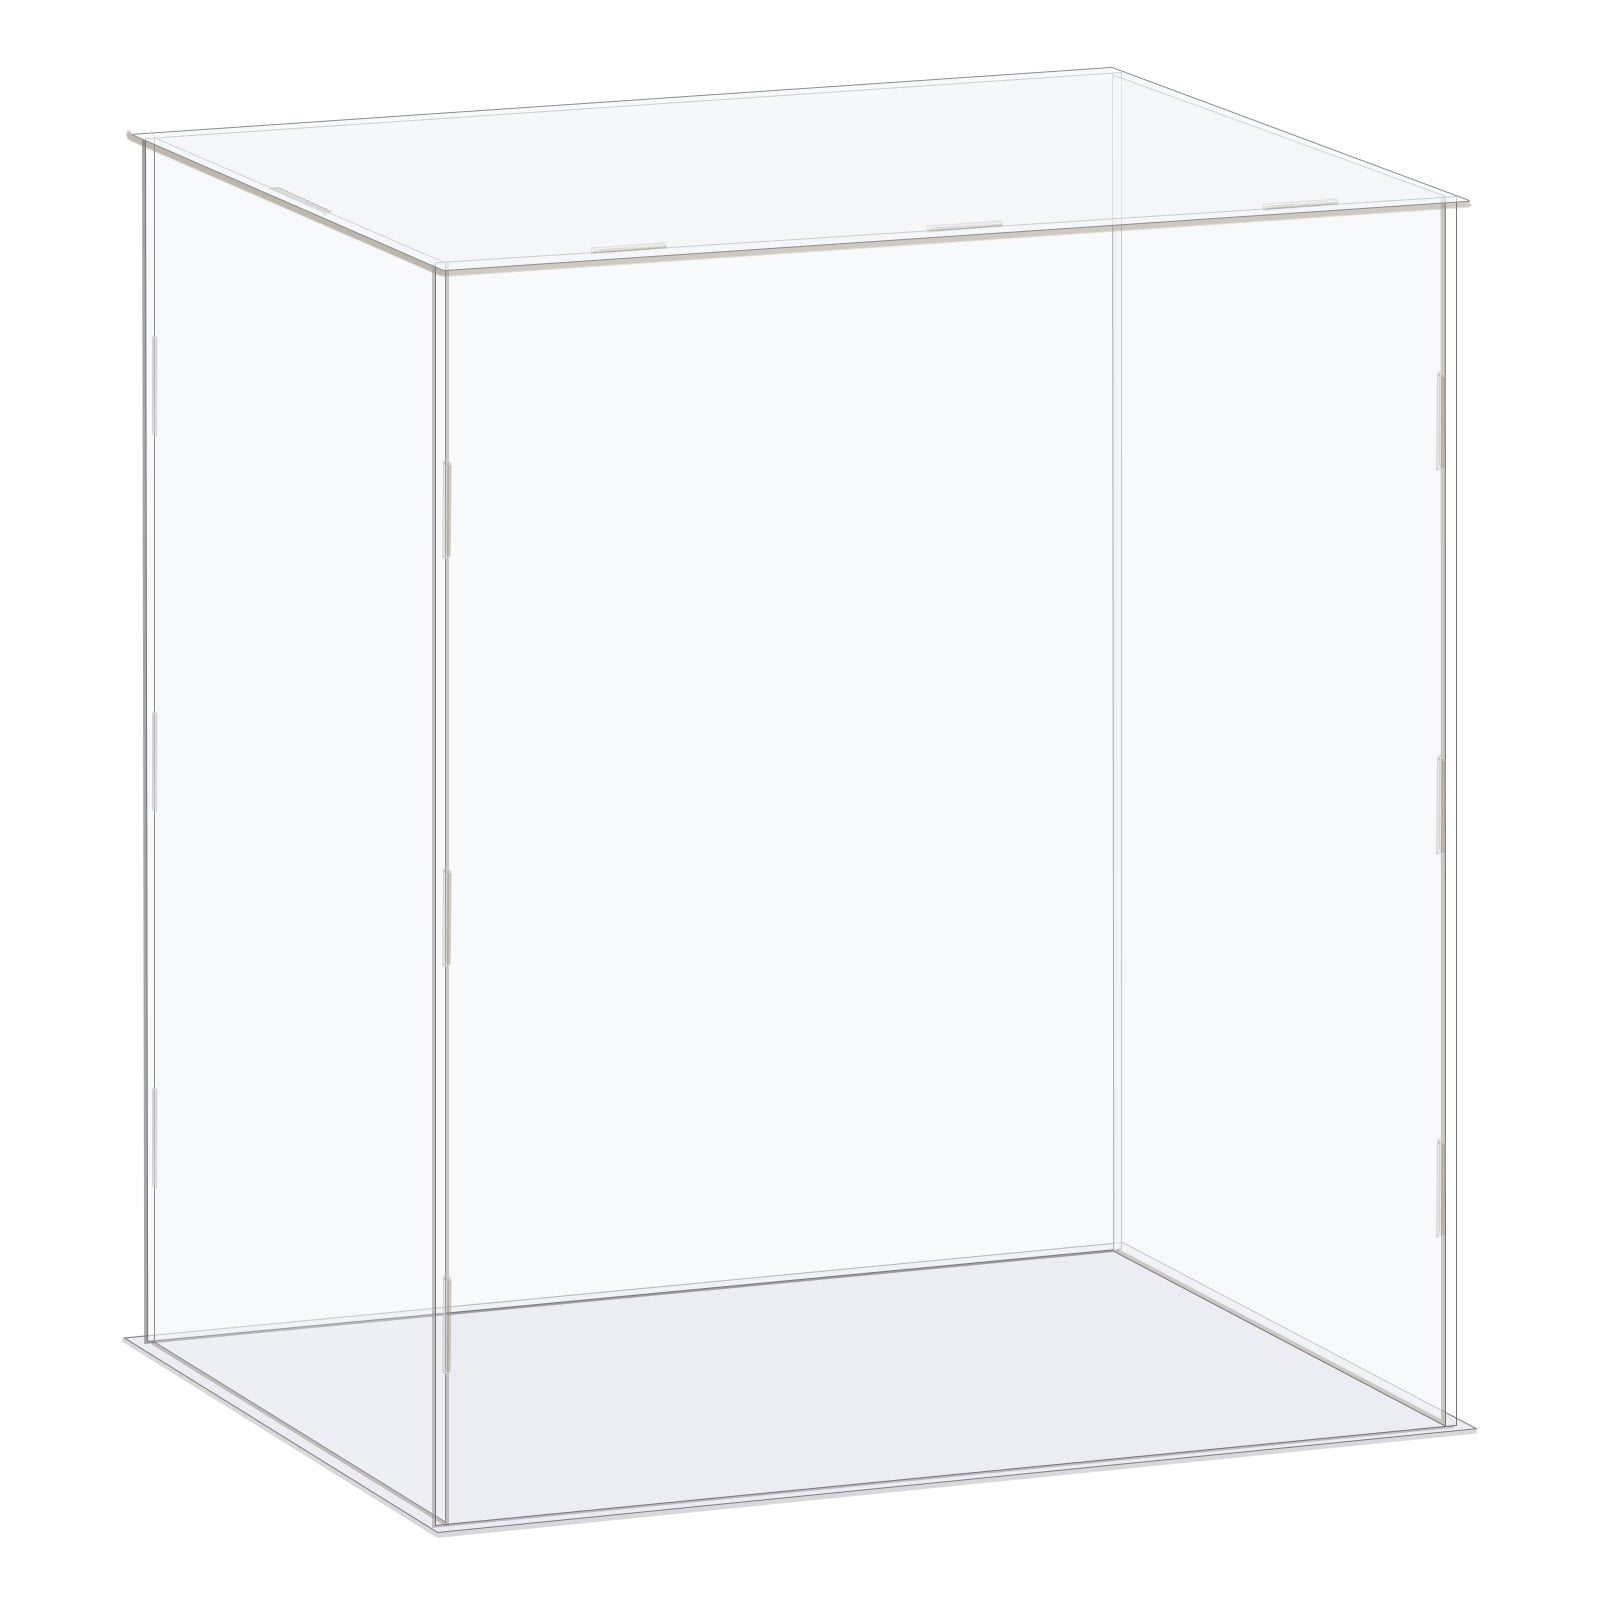 Uxcell Display Case Box Acrylic Box Transparent Dustproof Protection Showcase 16x16x11CM for Collectibles, Size: 16x16x11cm/6.3x6.3x4.3 inch, Blue